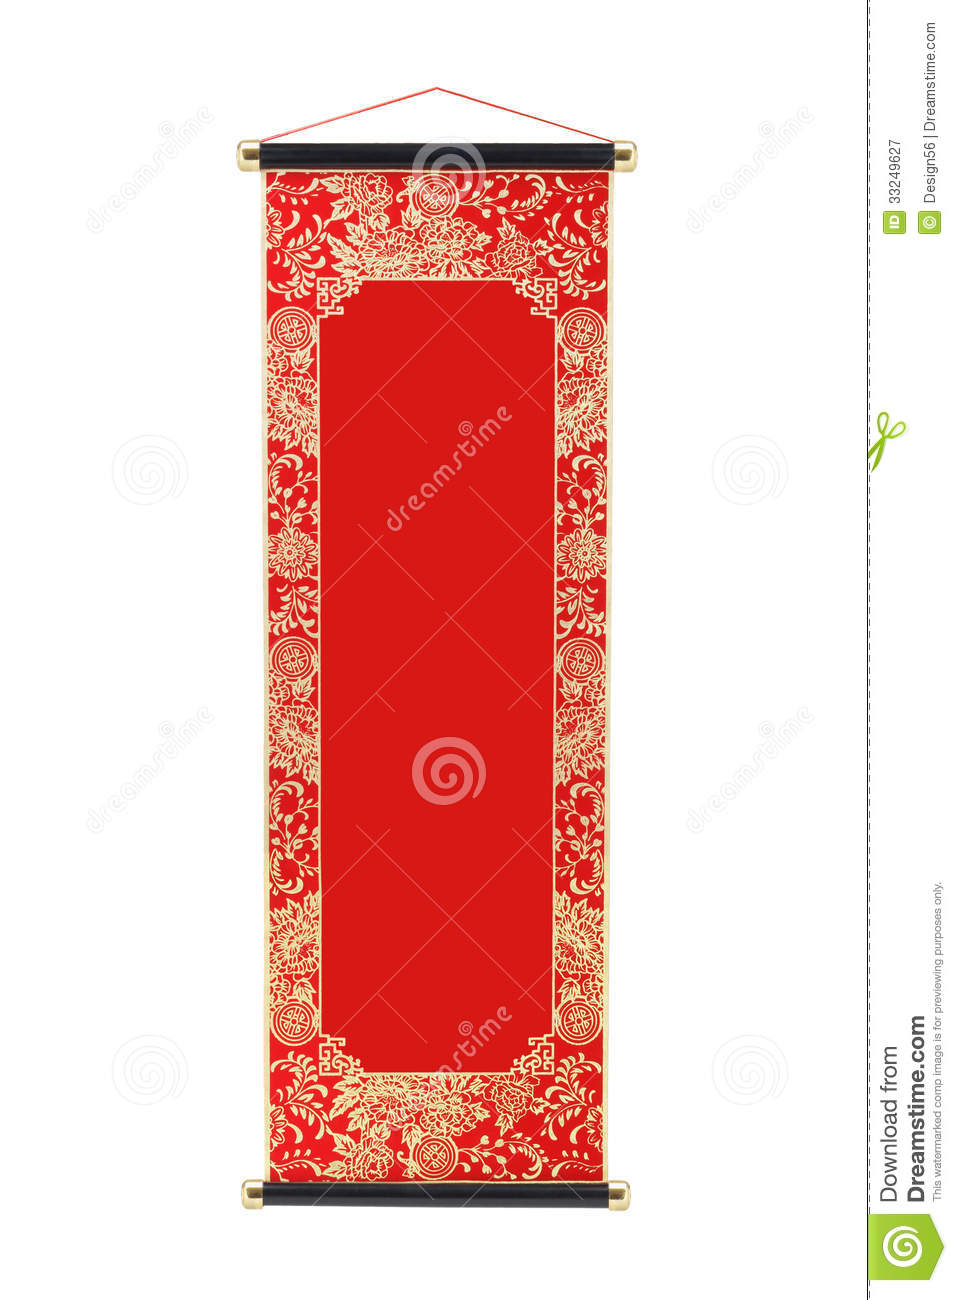 Chinese Scroll Royalty Free Stock Photography   Image  33249627